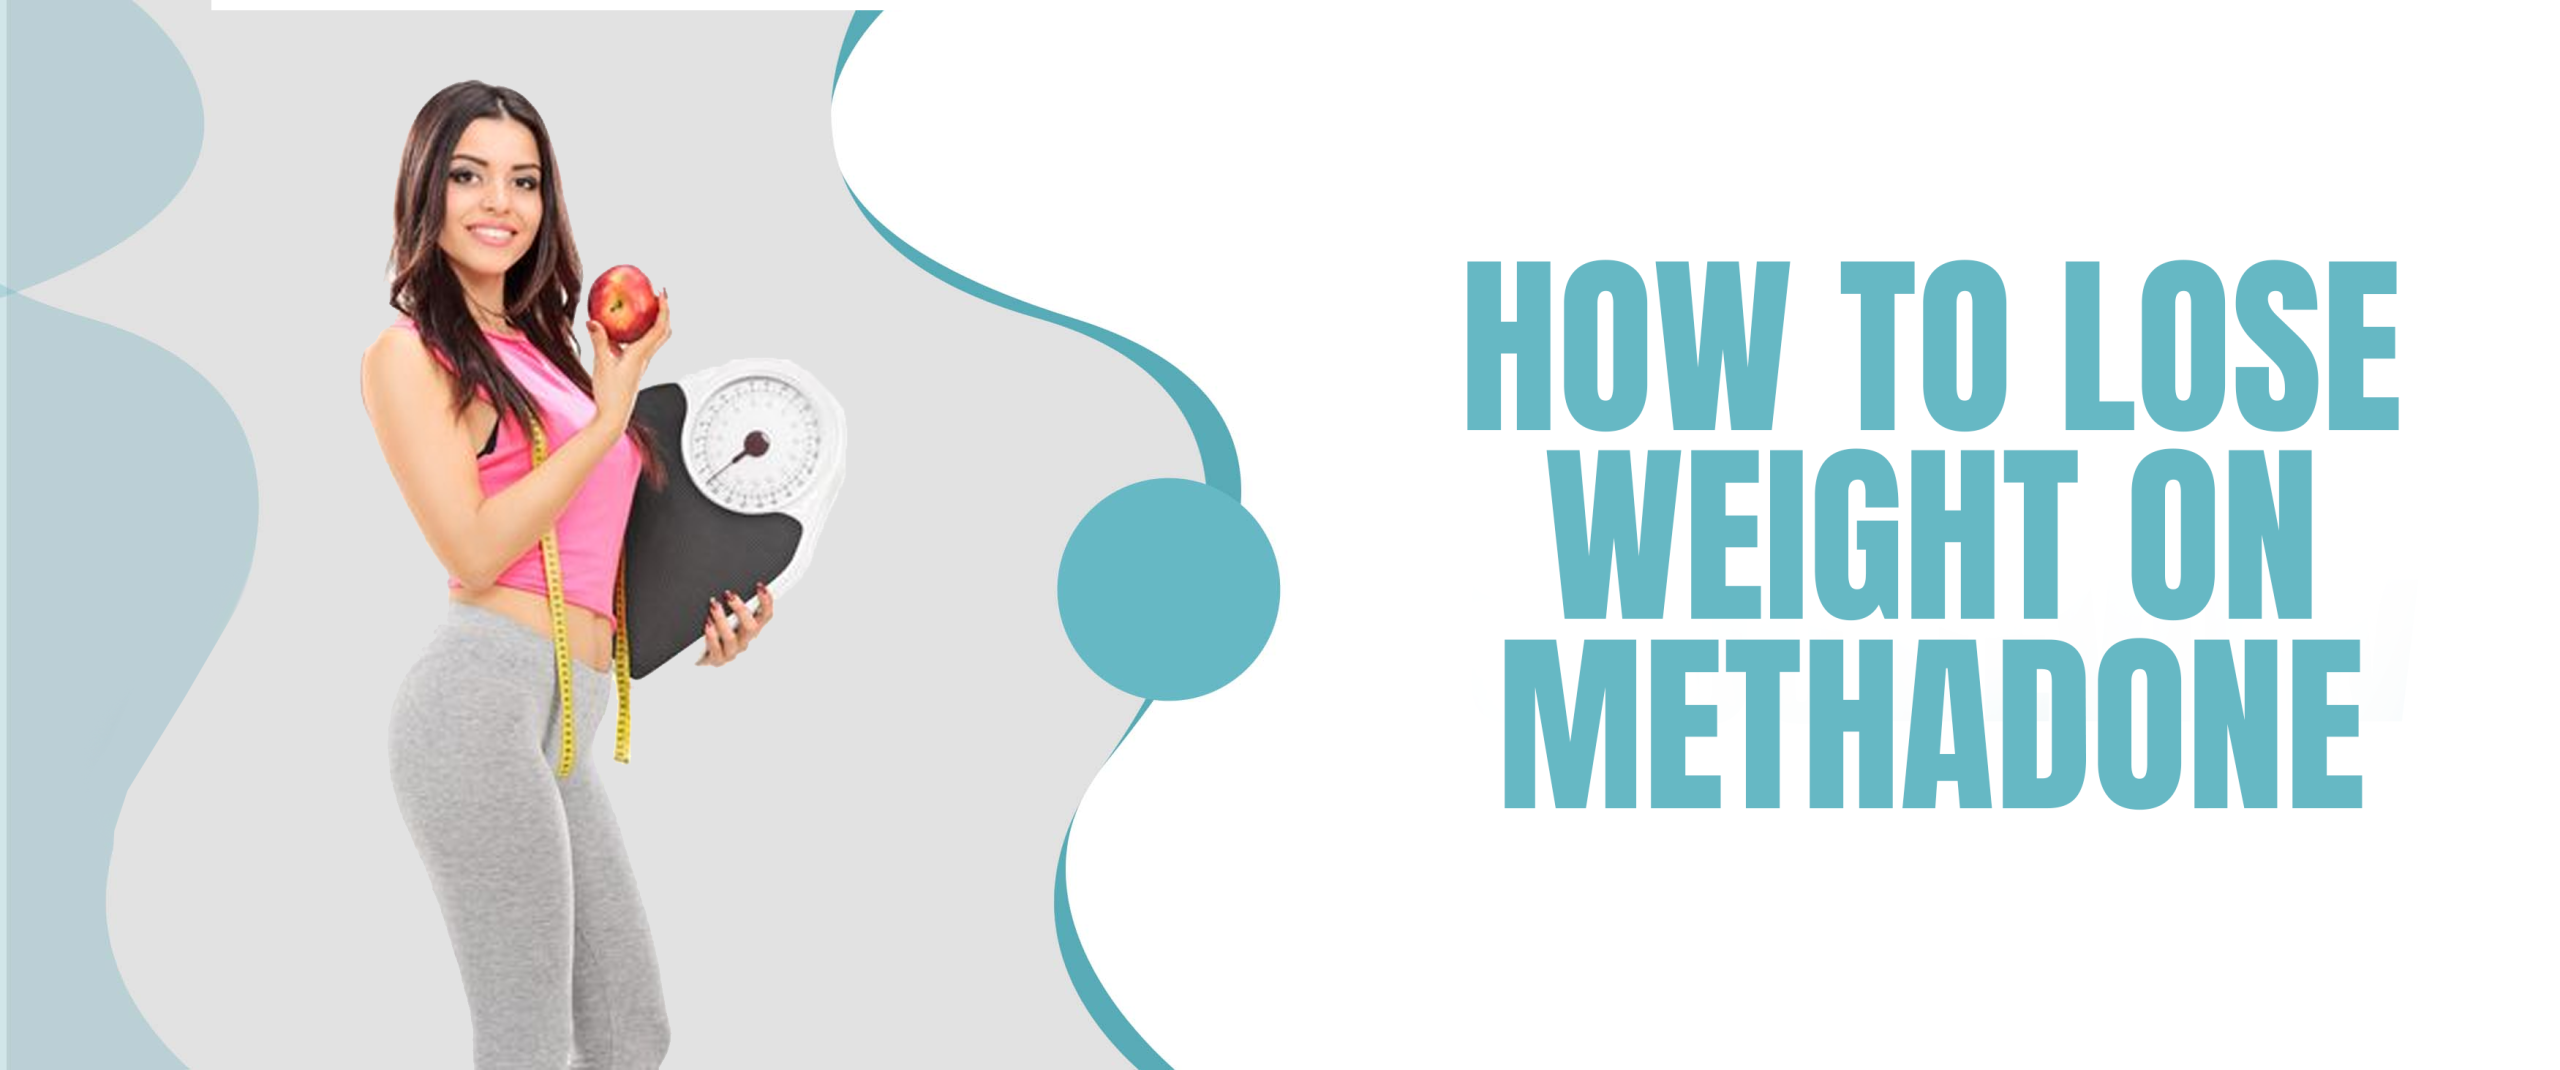 How To Lose Weight On Methadone